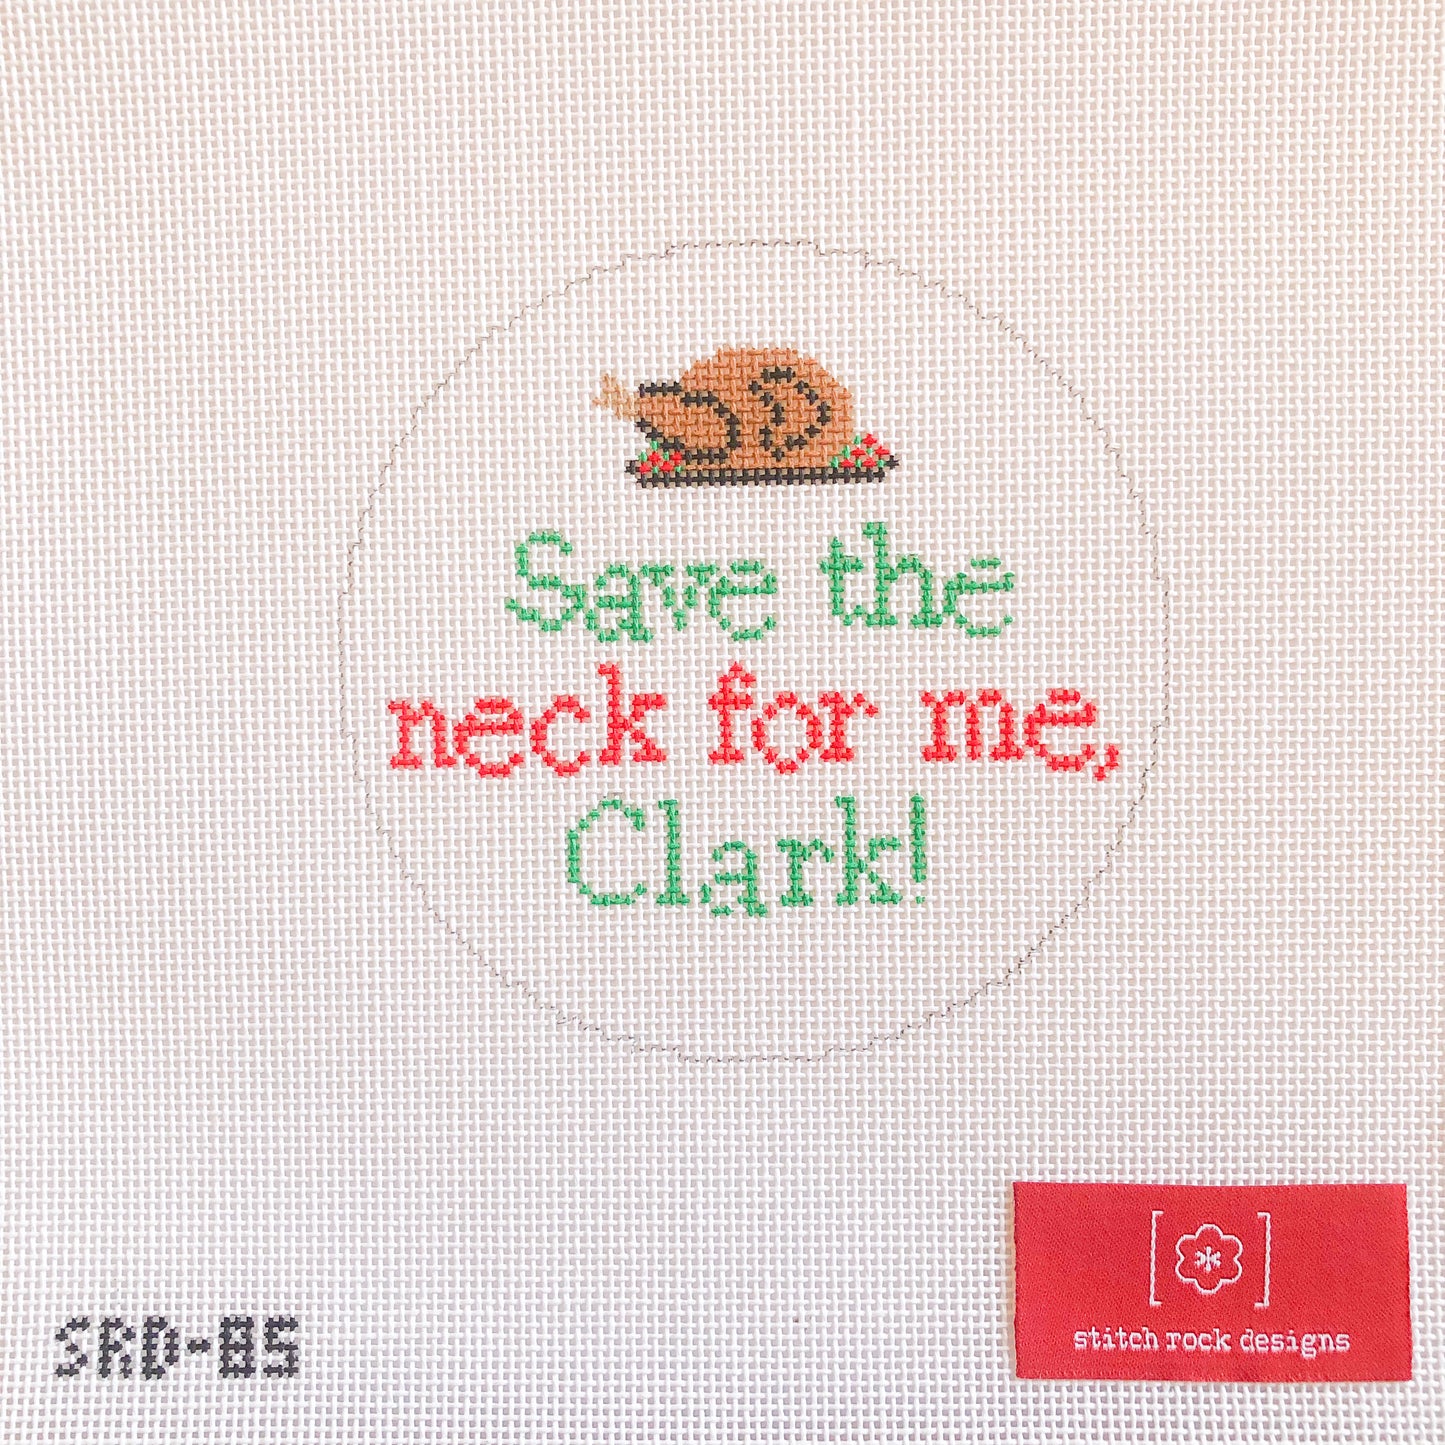 Save the Neck for Me, Clark!